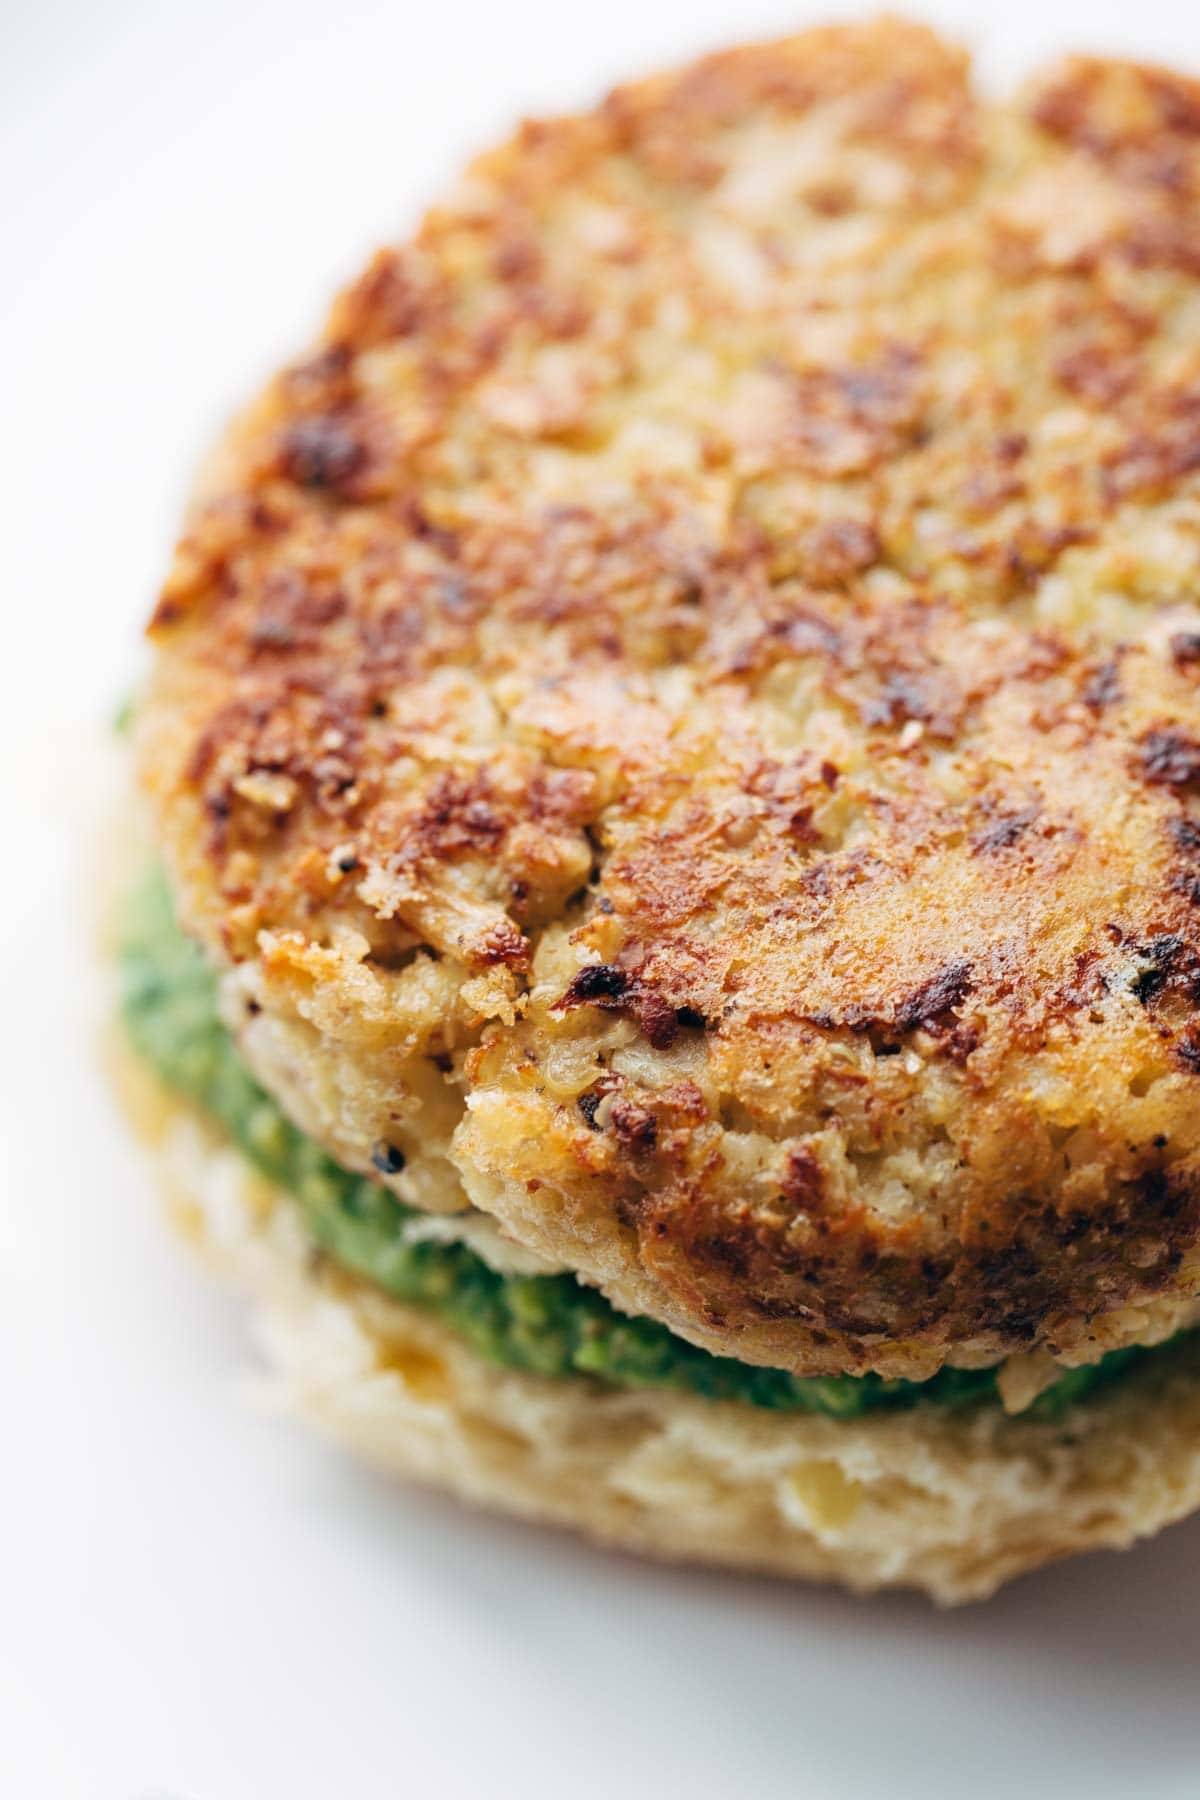 Recipe for Spicy Cauliflower Burgers with avocado sauce, cilantro lime slaw, and chipotle mayo! Meatless, filling, and delicious! | pinchofyum.com